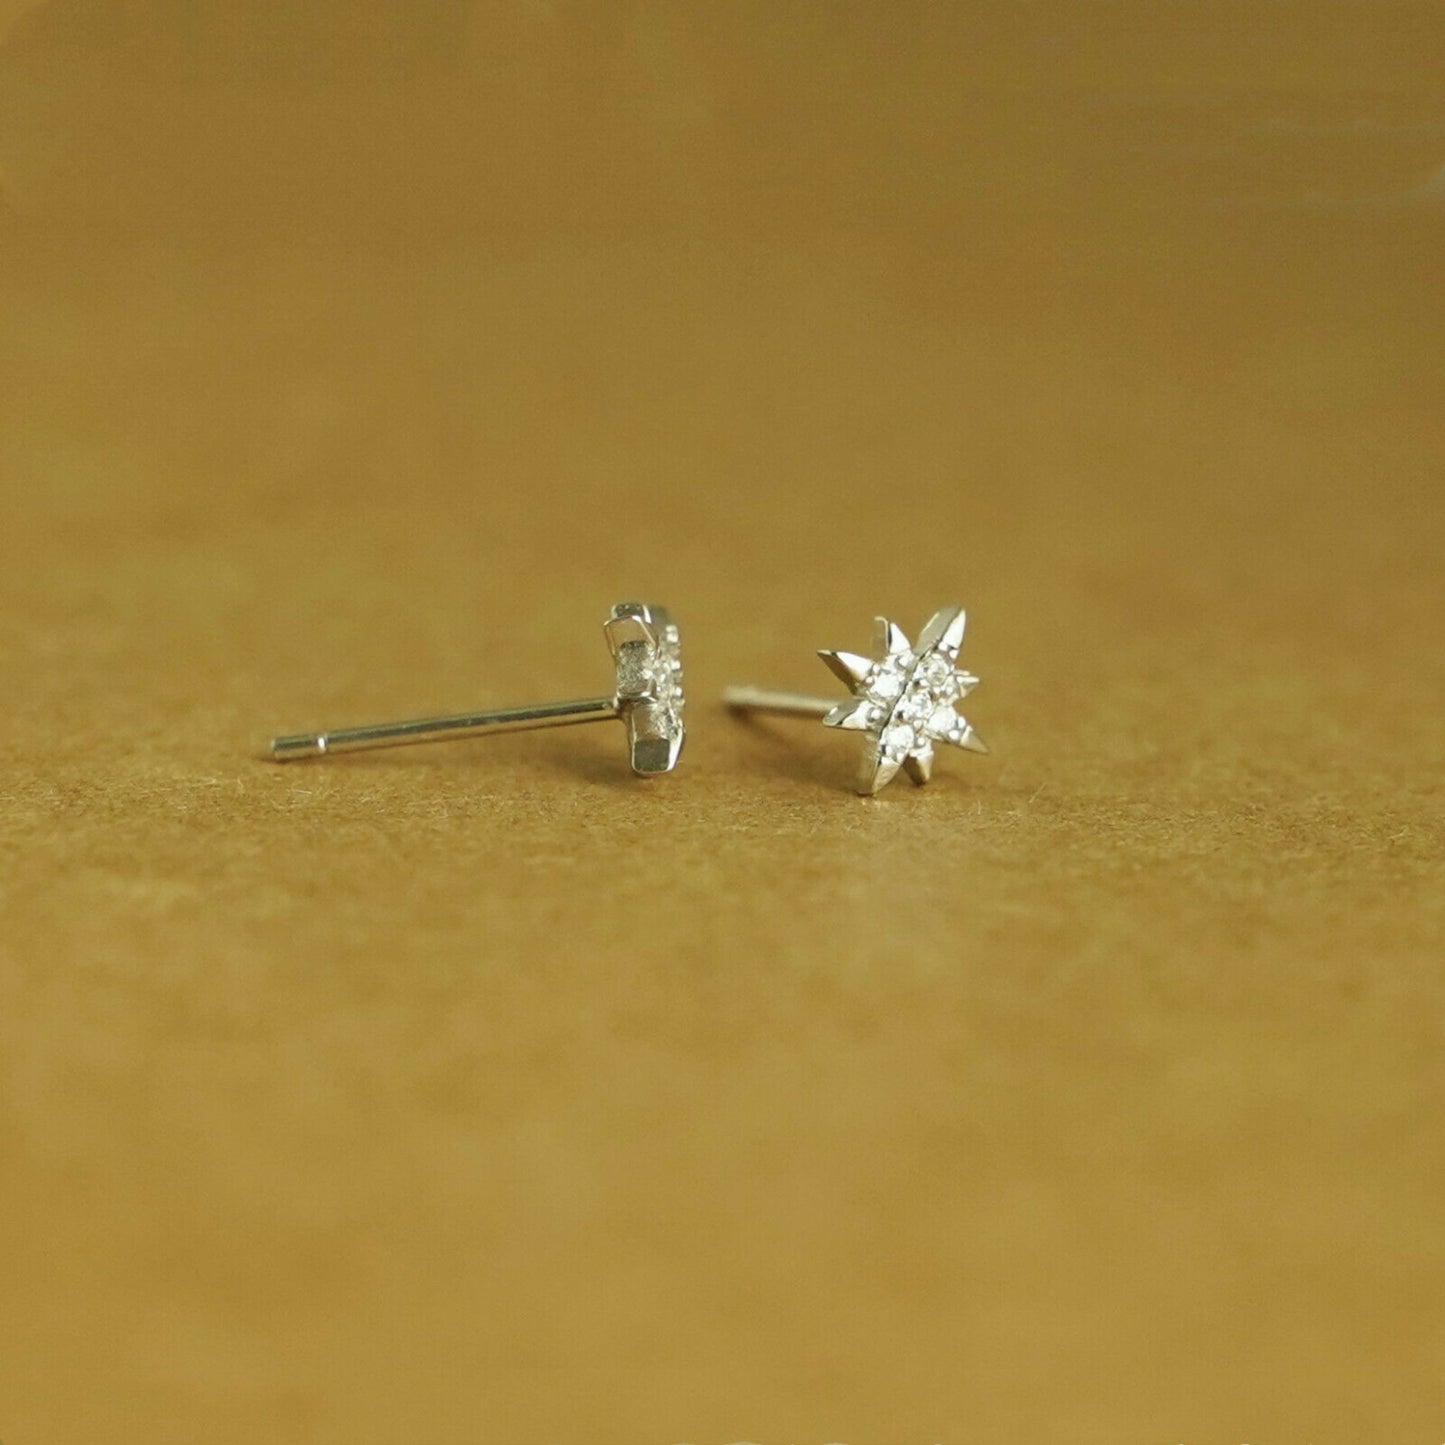 925 Sterling Silver Star Stud Earrings with CZ North Pole Star Design